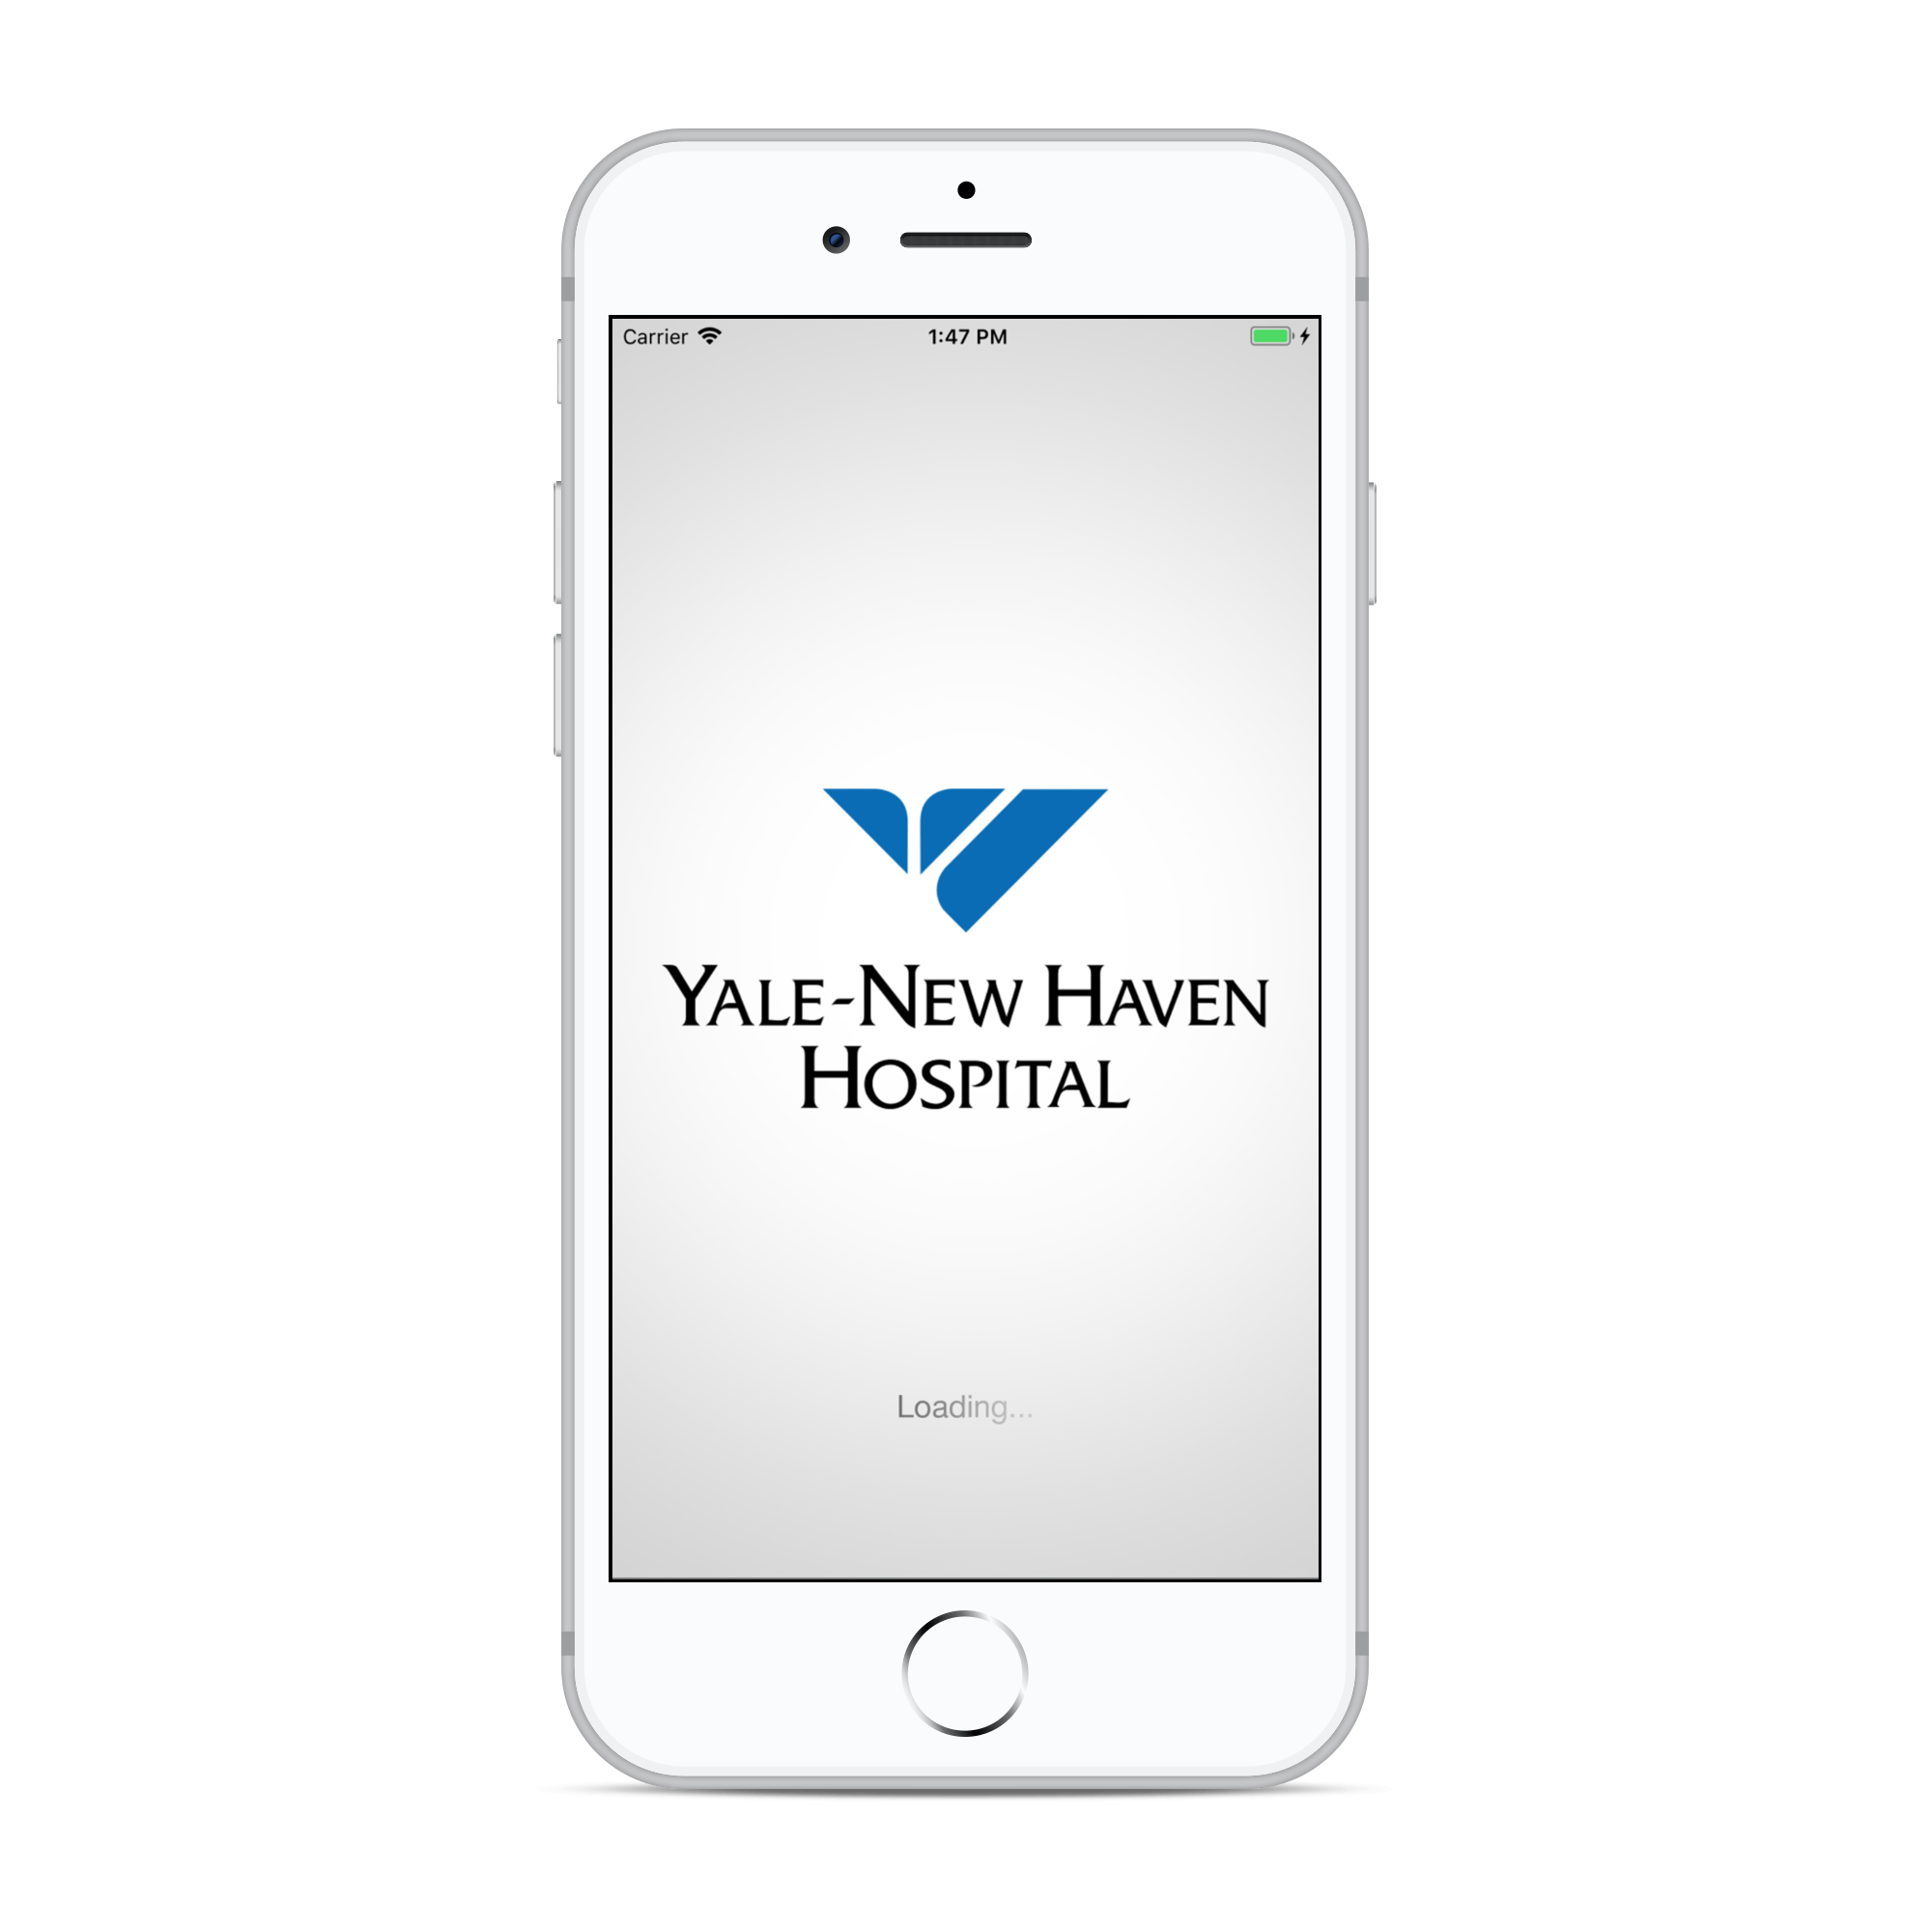 YALE-NEW HAVEN HOSPITAL